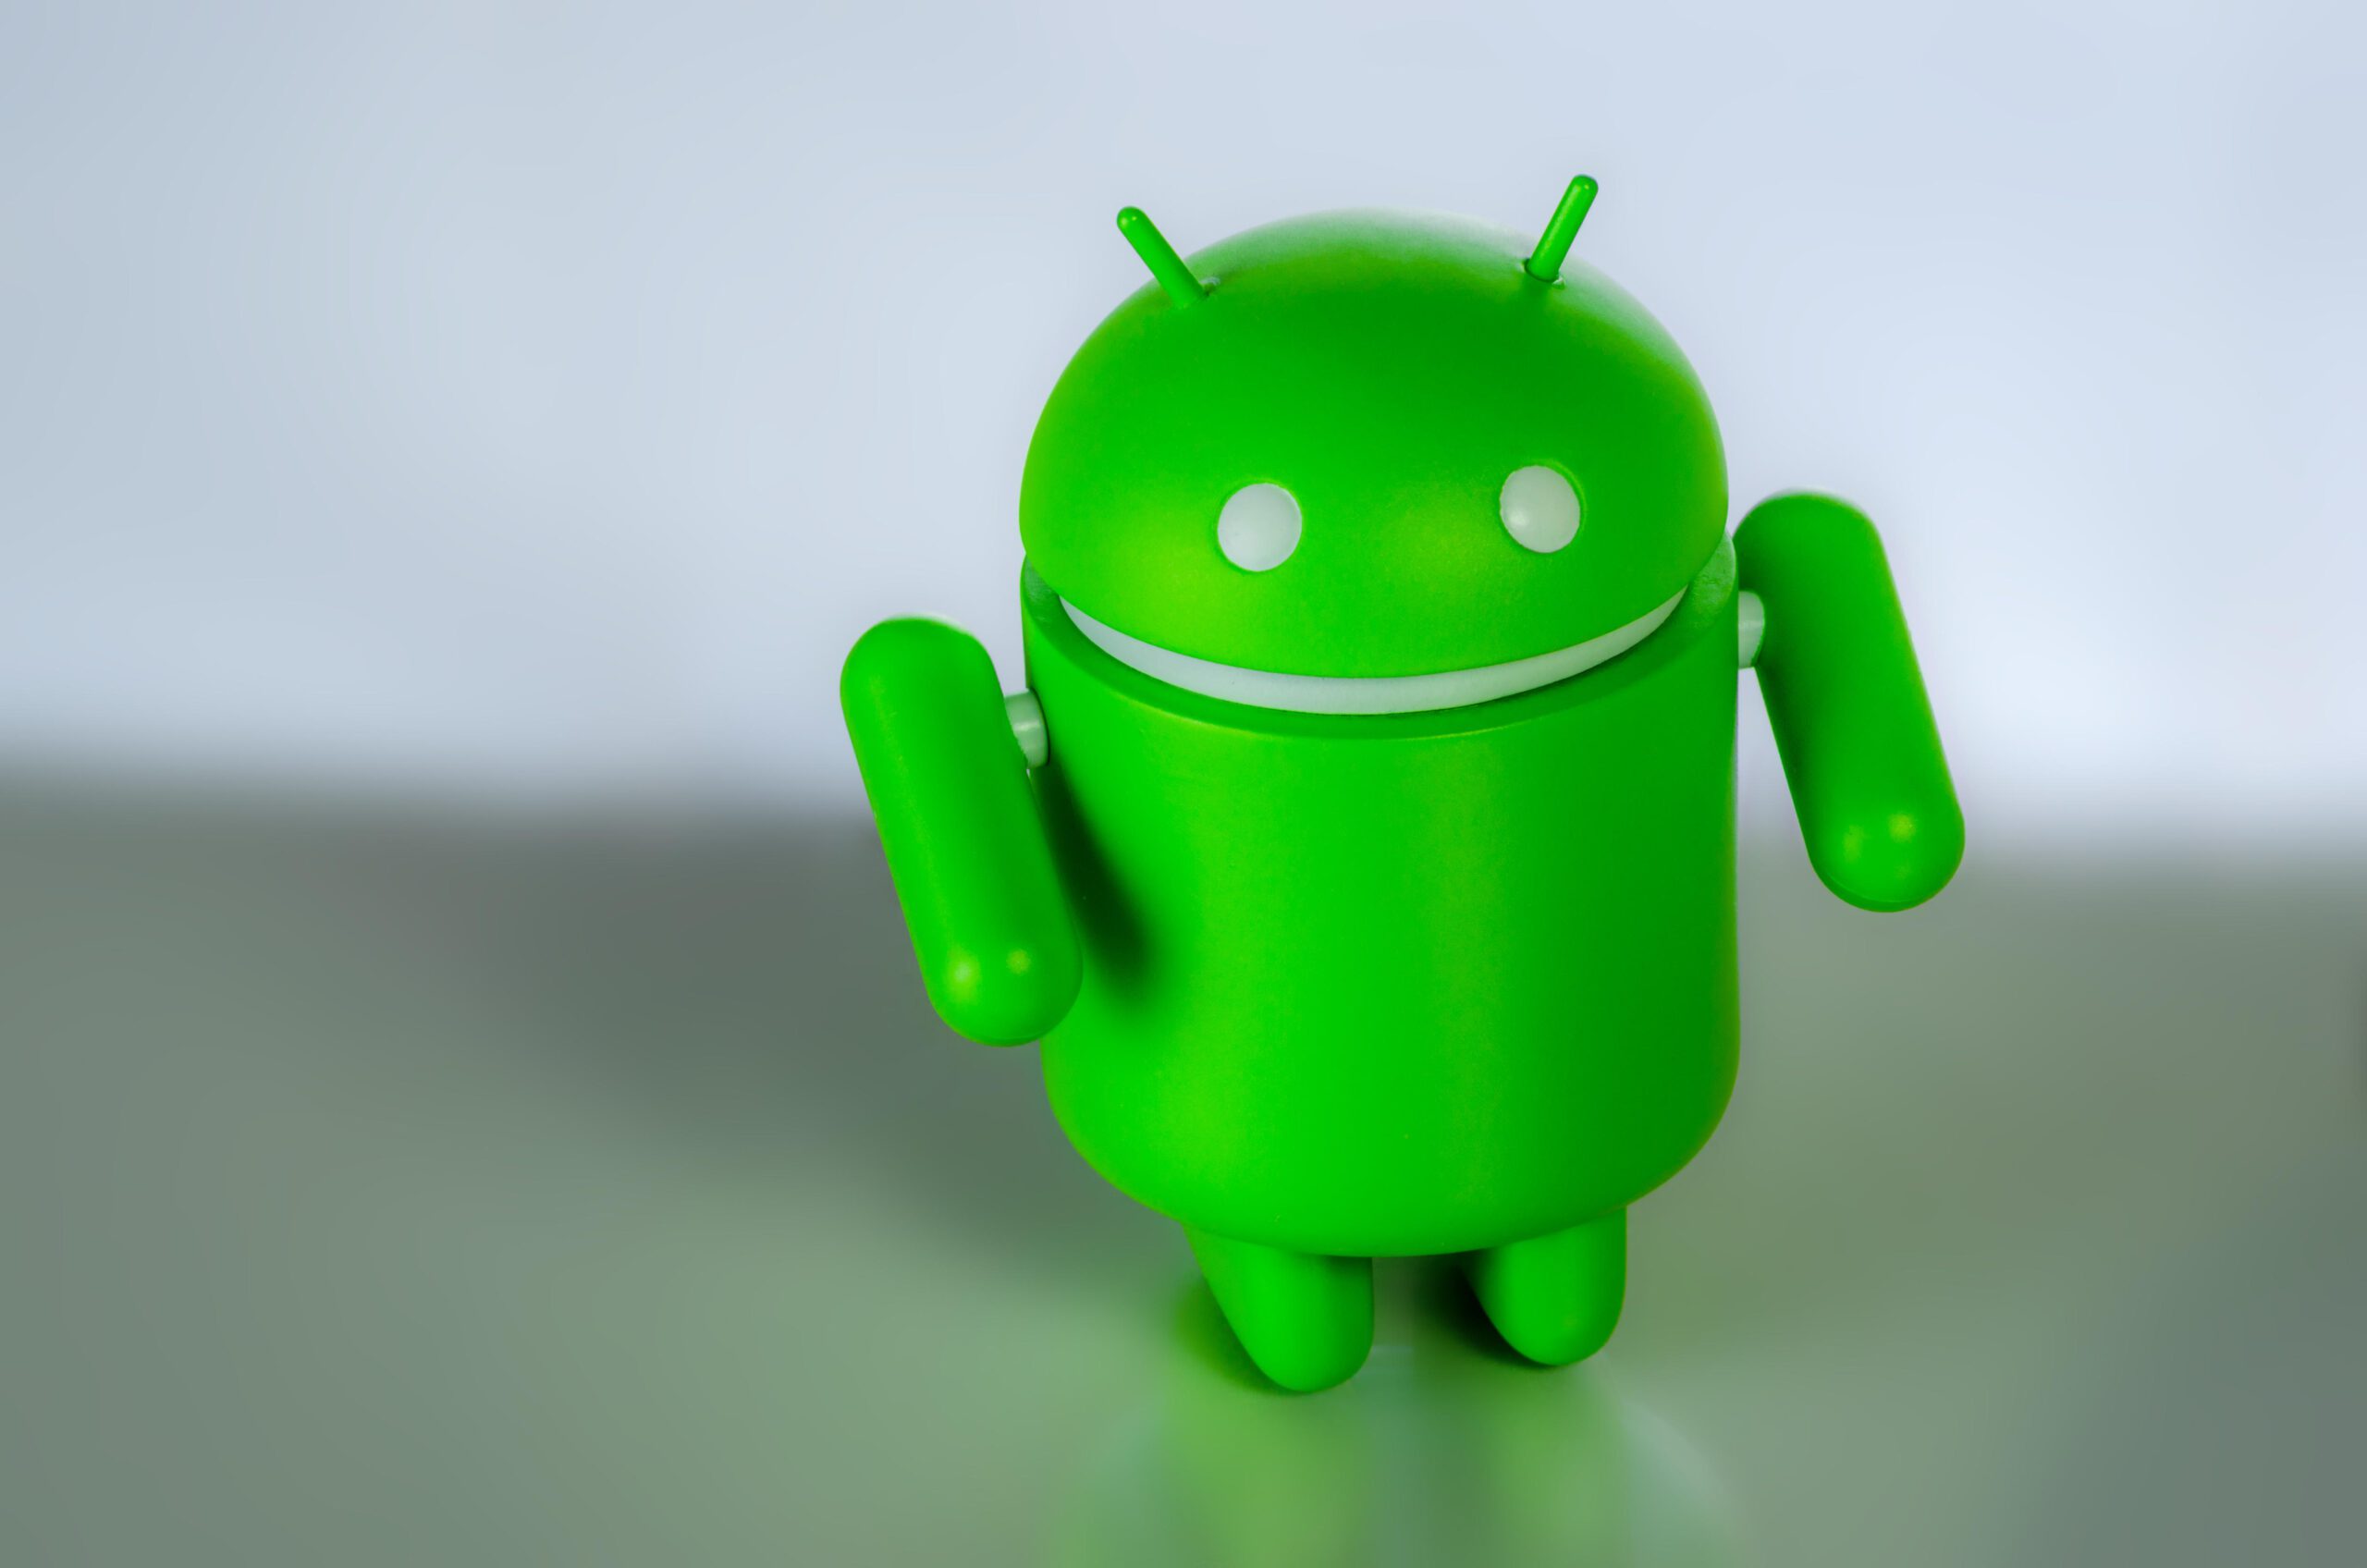 60K+ Android Apps Have Delivered Adware Undetected for Months – Source: www.darkreading.com